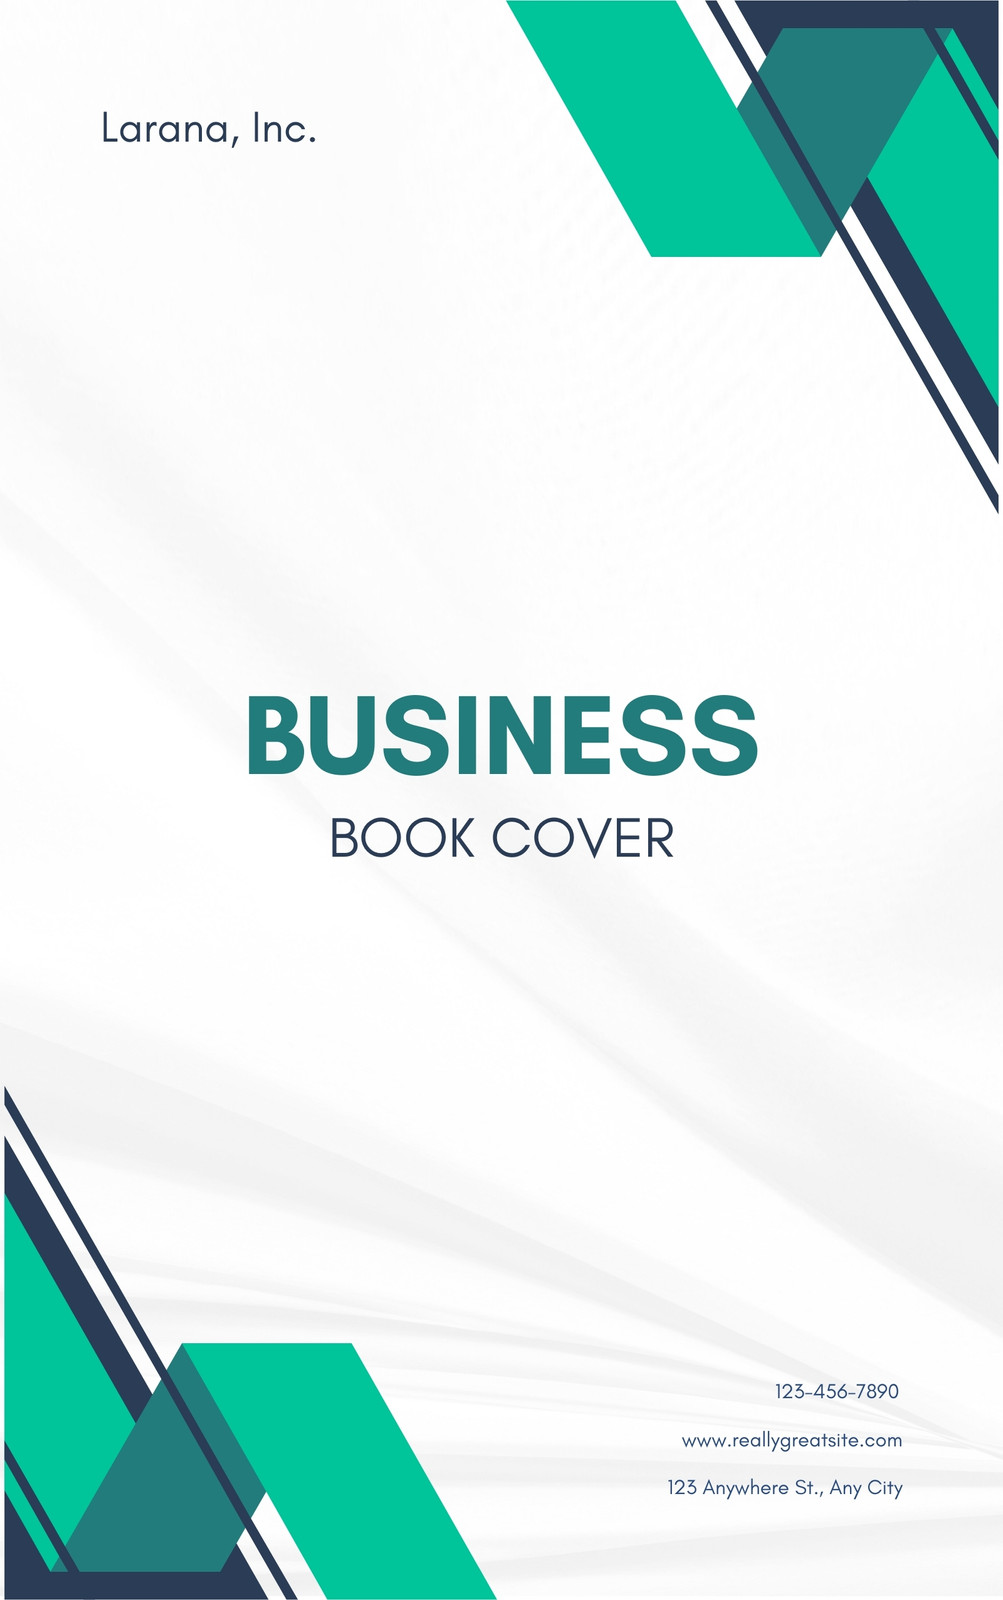 9 Simple Steps to Create a Book Cover Using Canva